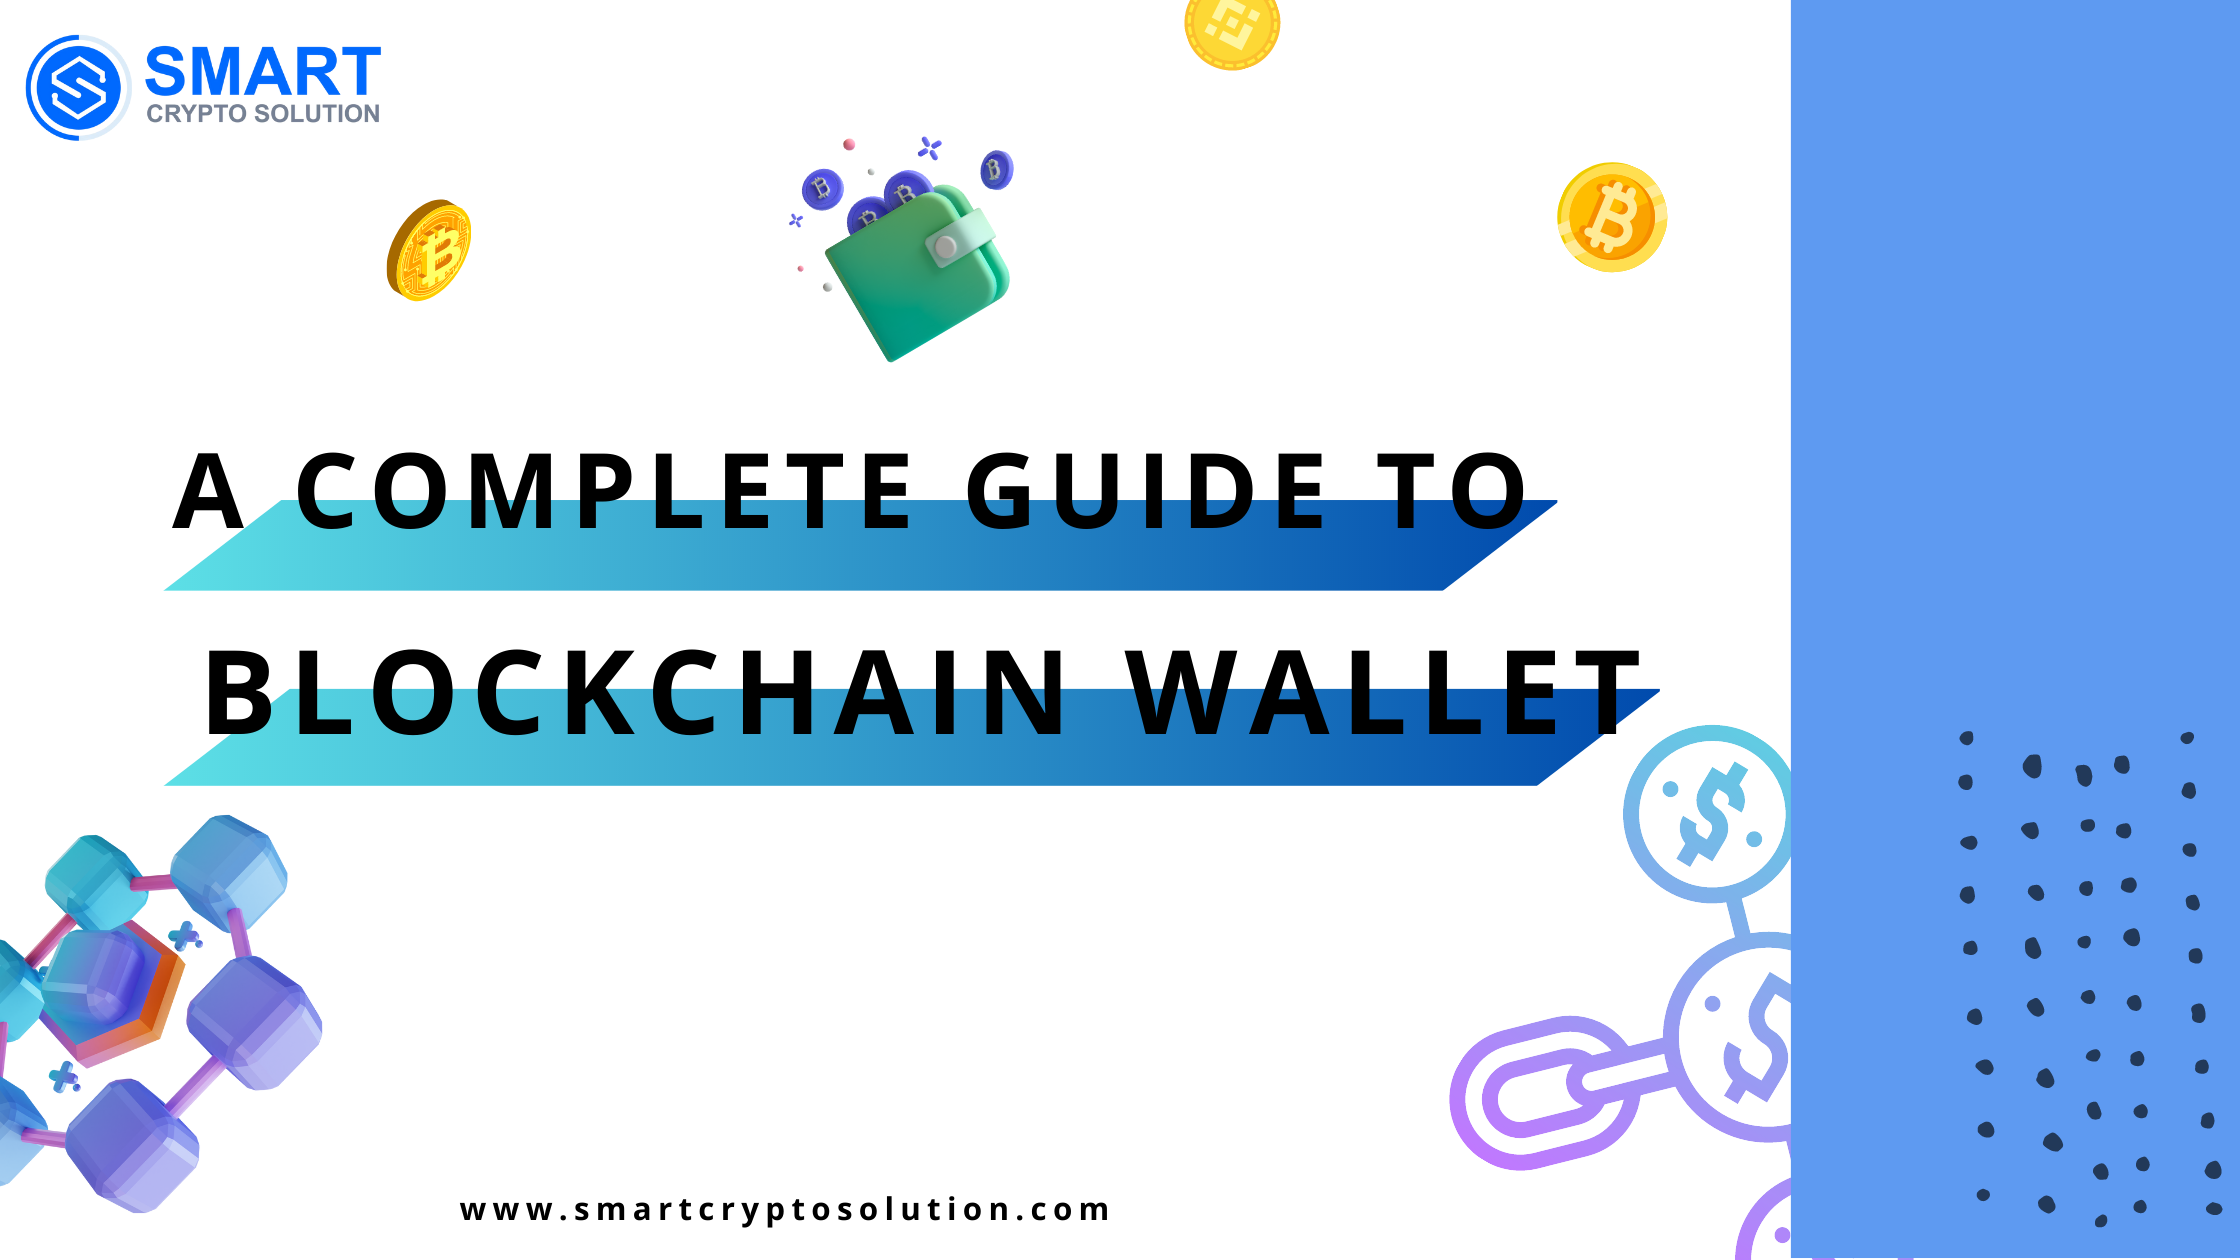 A Complete Guide to Blockchain Wallet